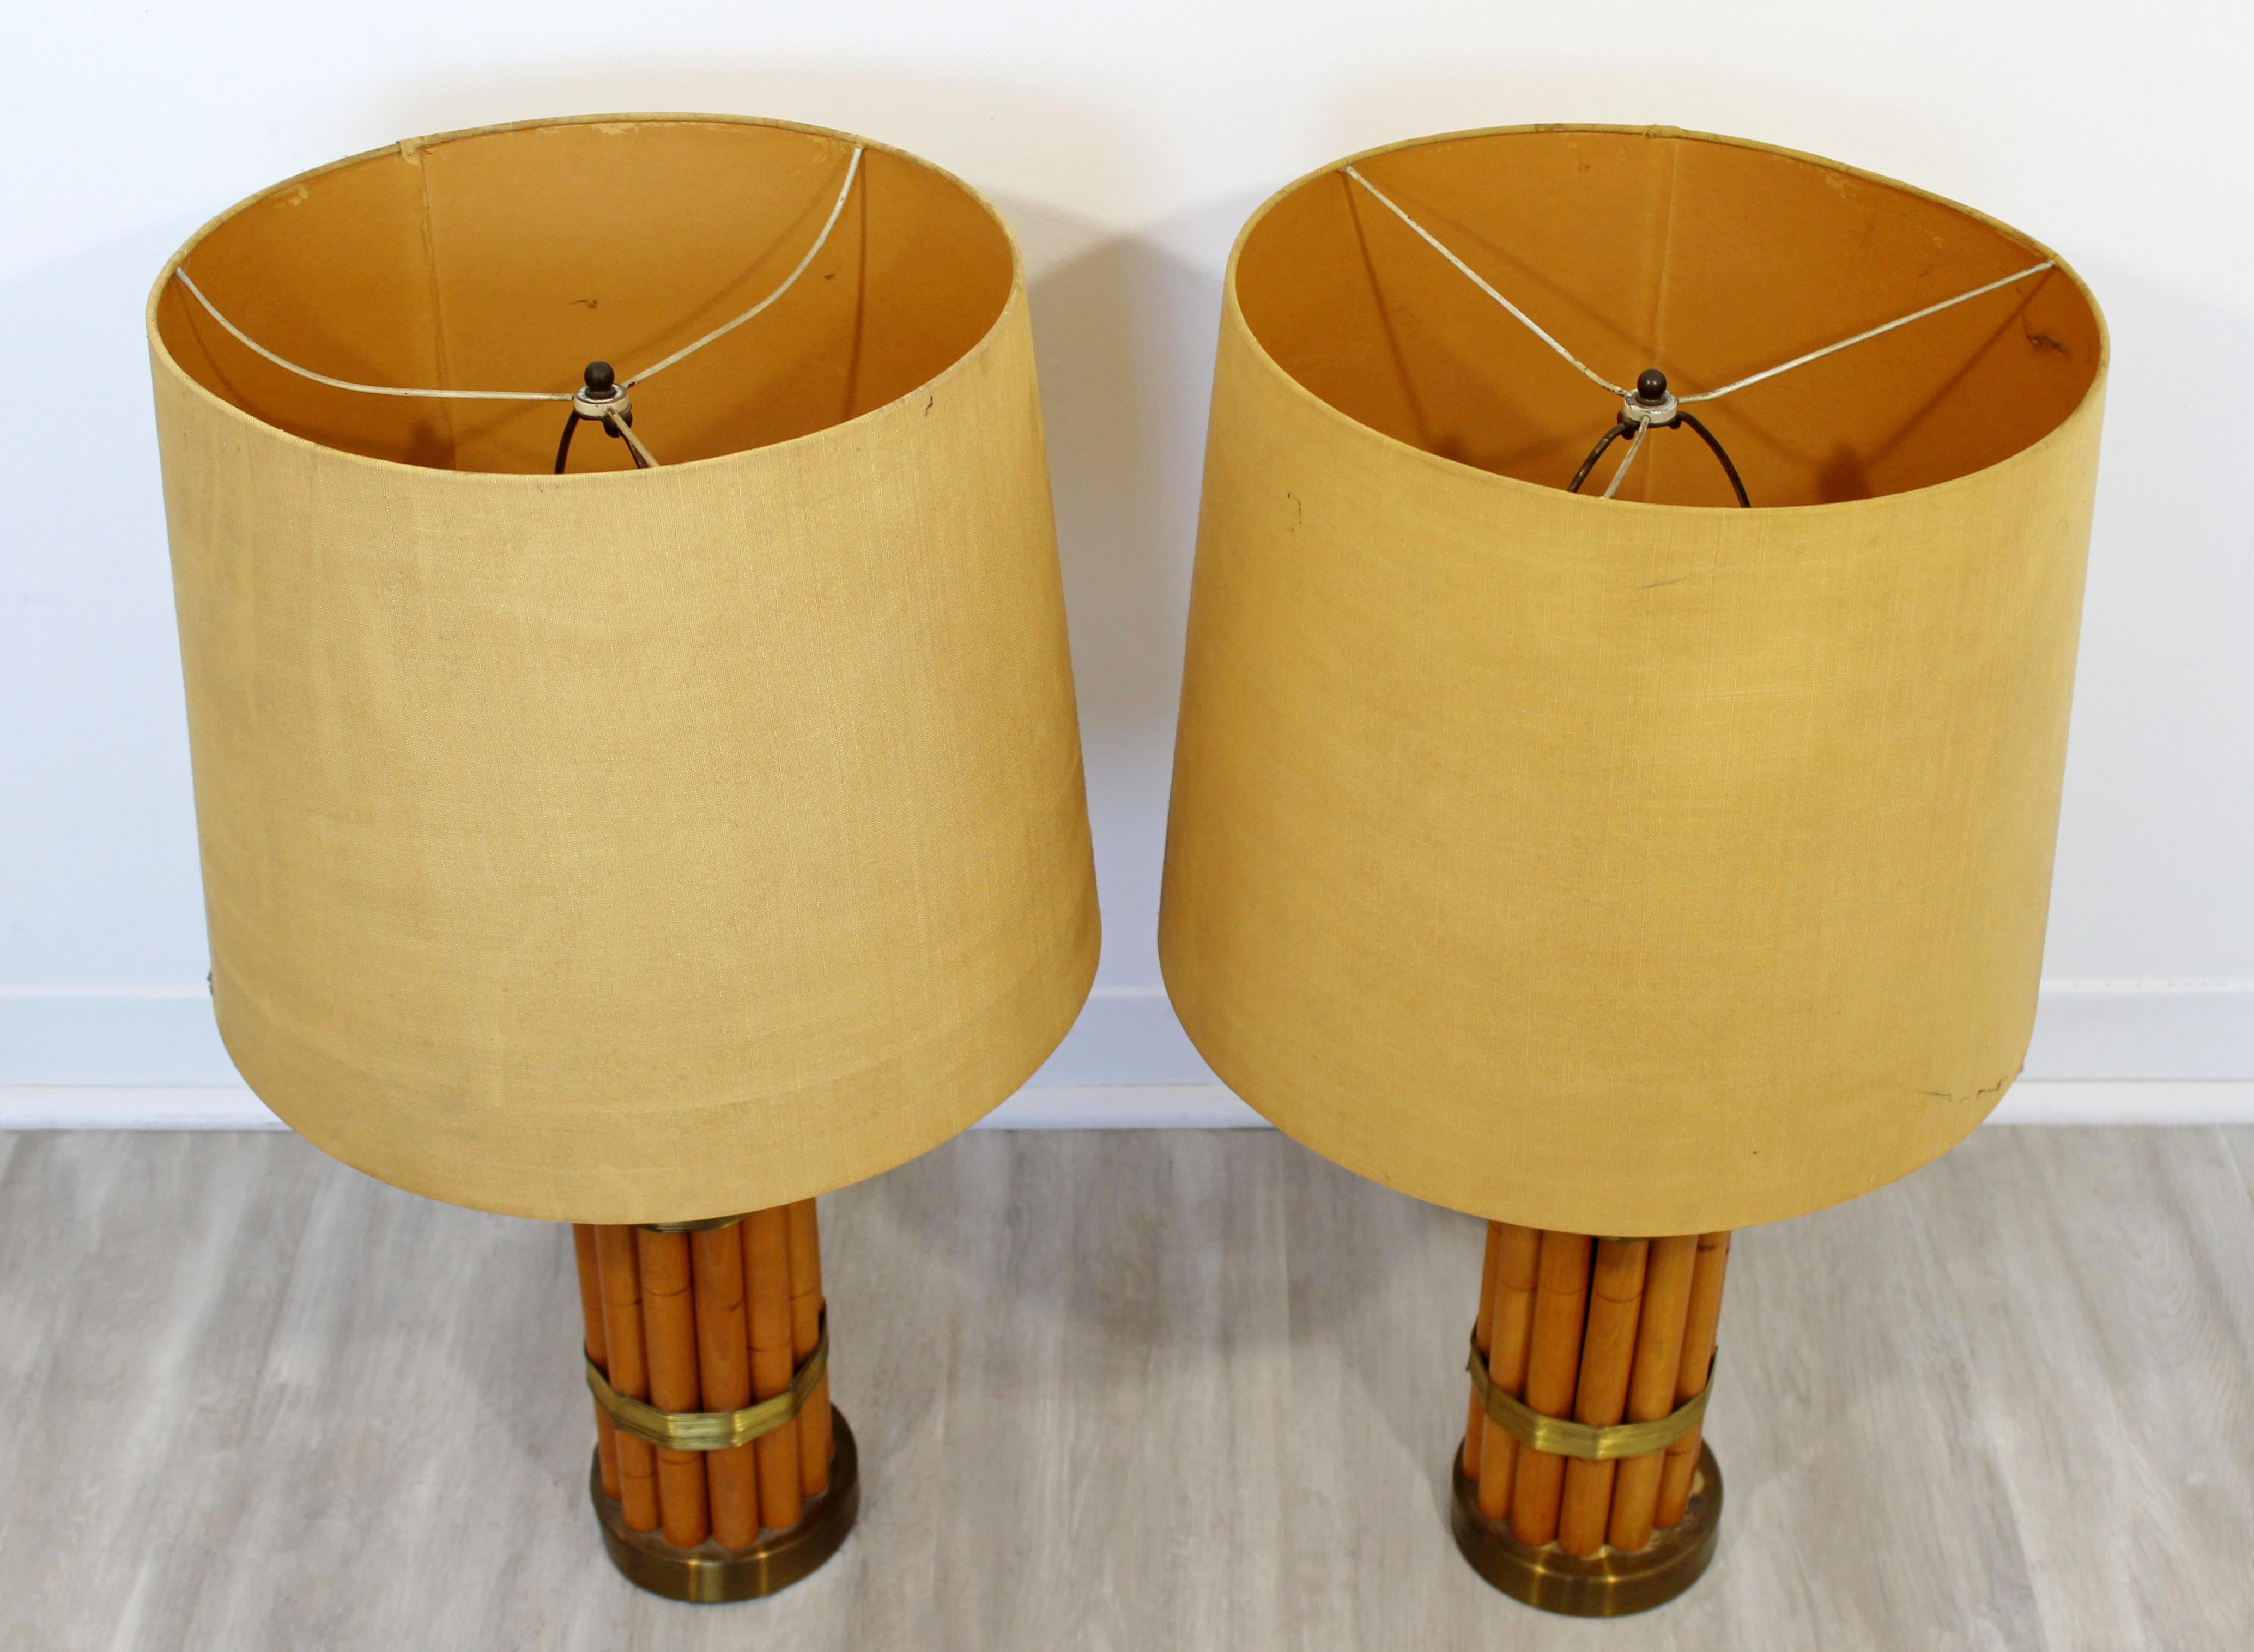 For your consideration is a beautiful pair of bamboo and brass table lamps, by Russell Wright, circa 1950s. In excellent vintage condition. The dimensions of the lamps are 5.5